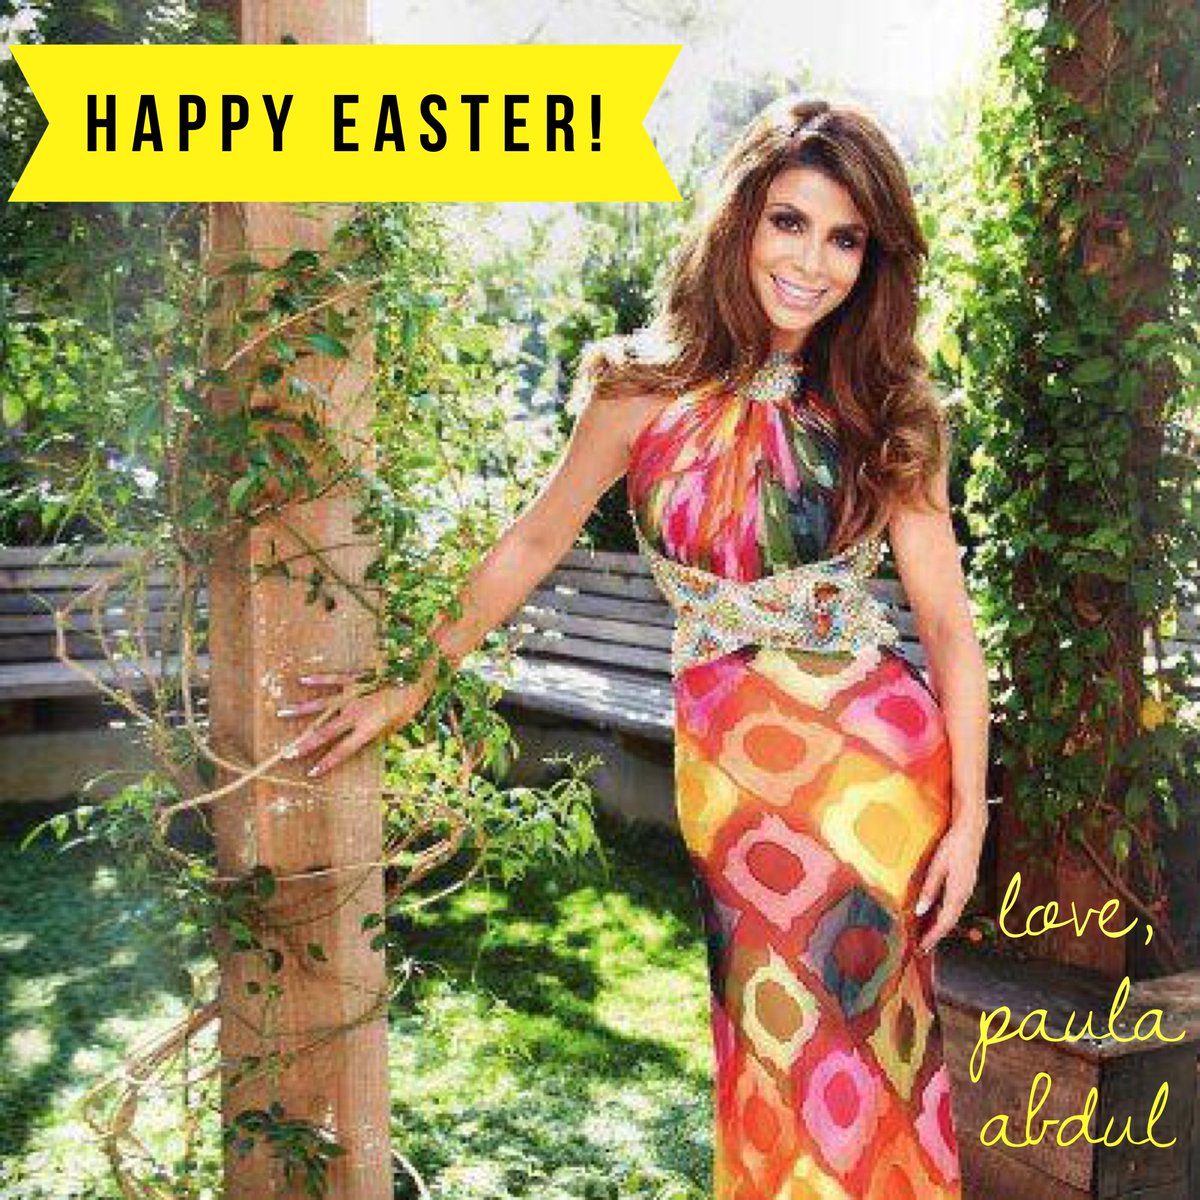 Happy Easter! Have a love-filled #eastersunday! Love, Paula xoxoP https://t.co/UIpwl4KqCV